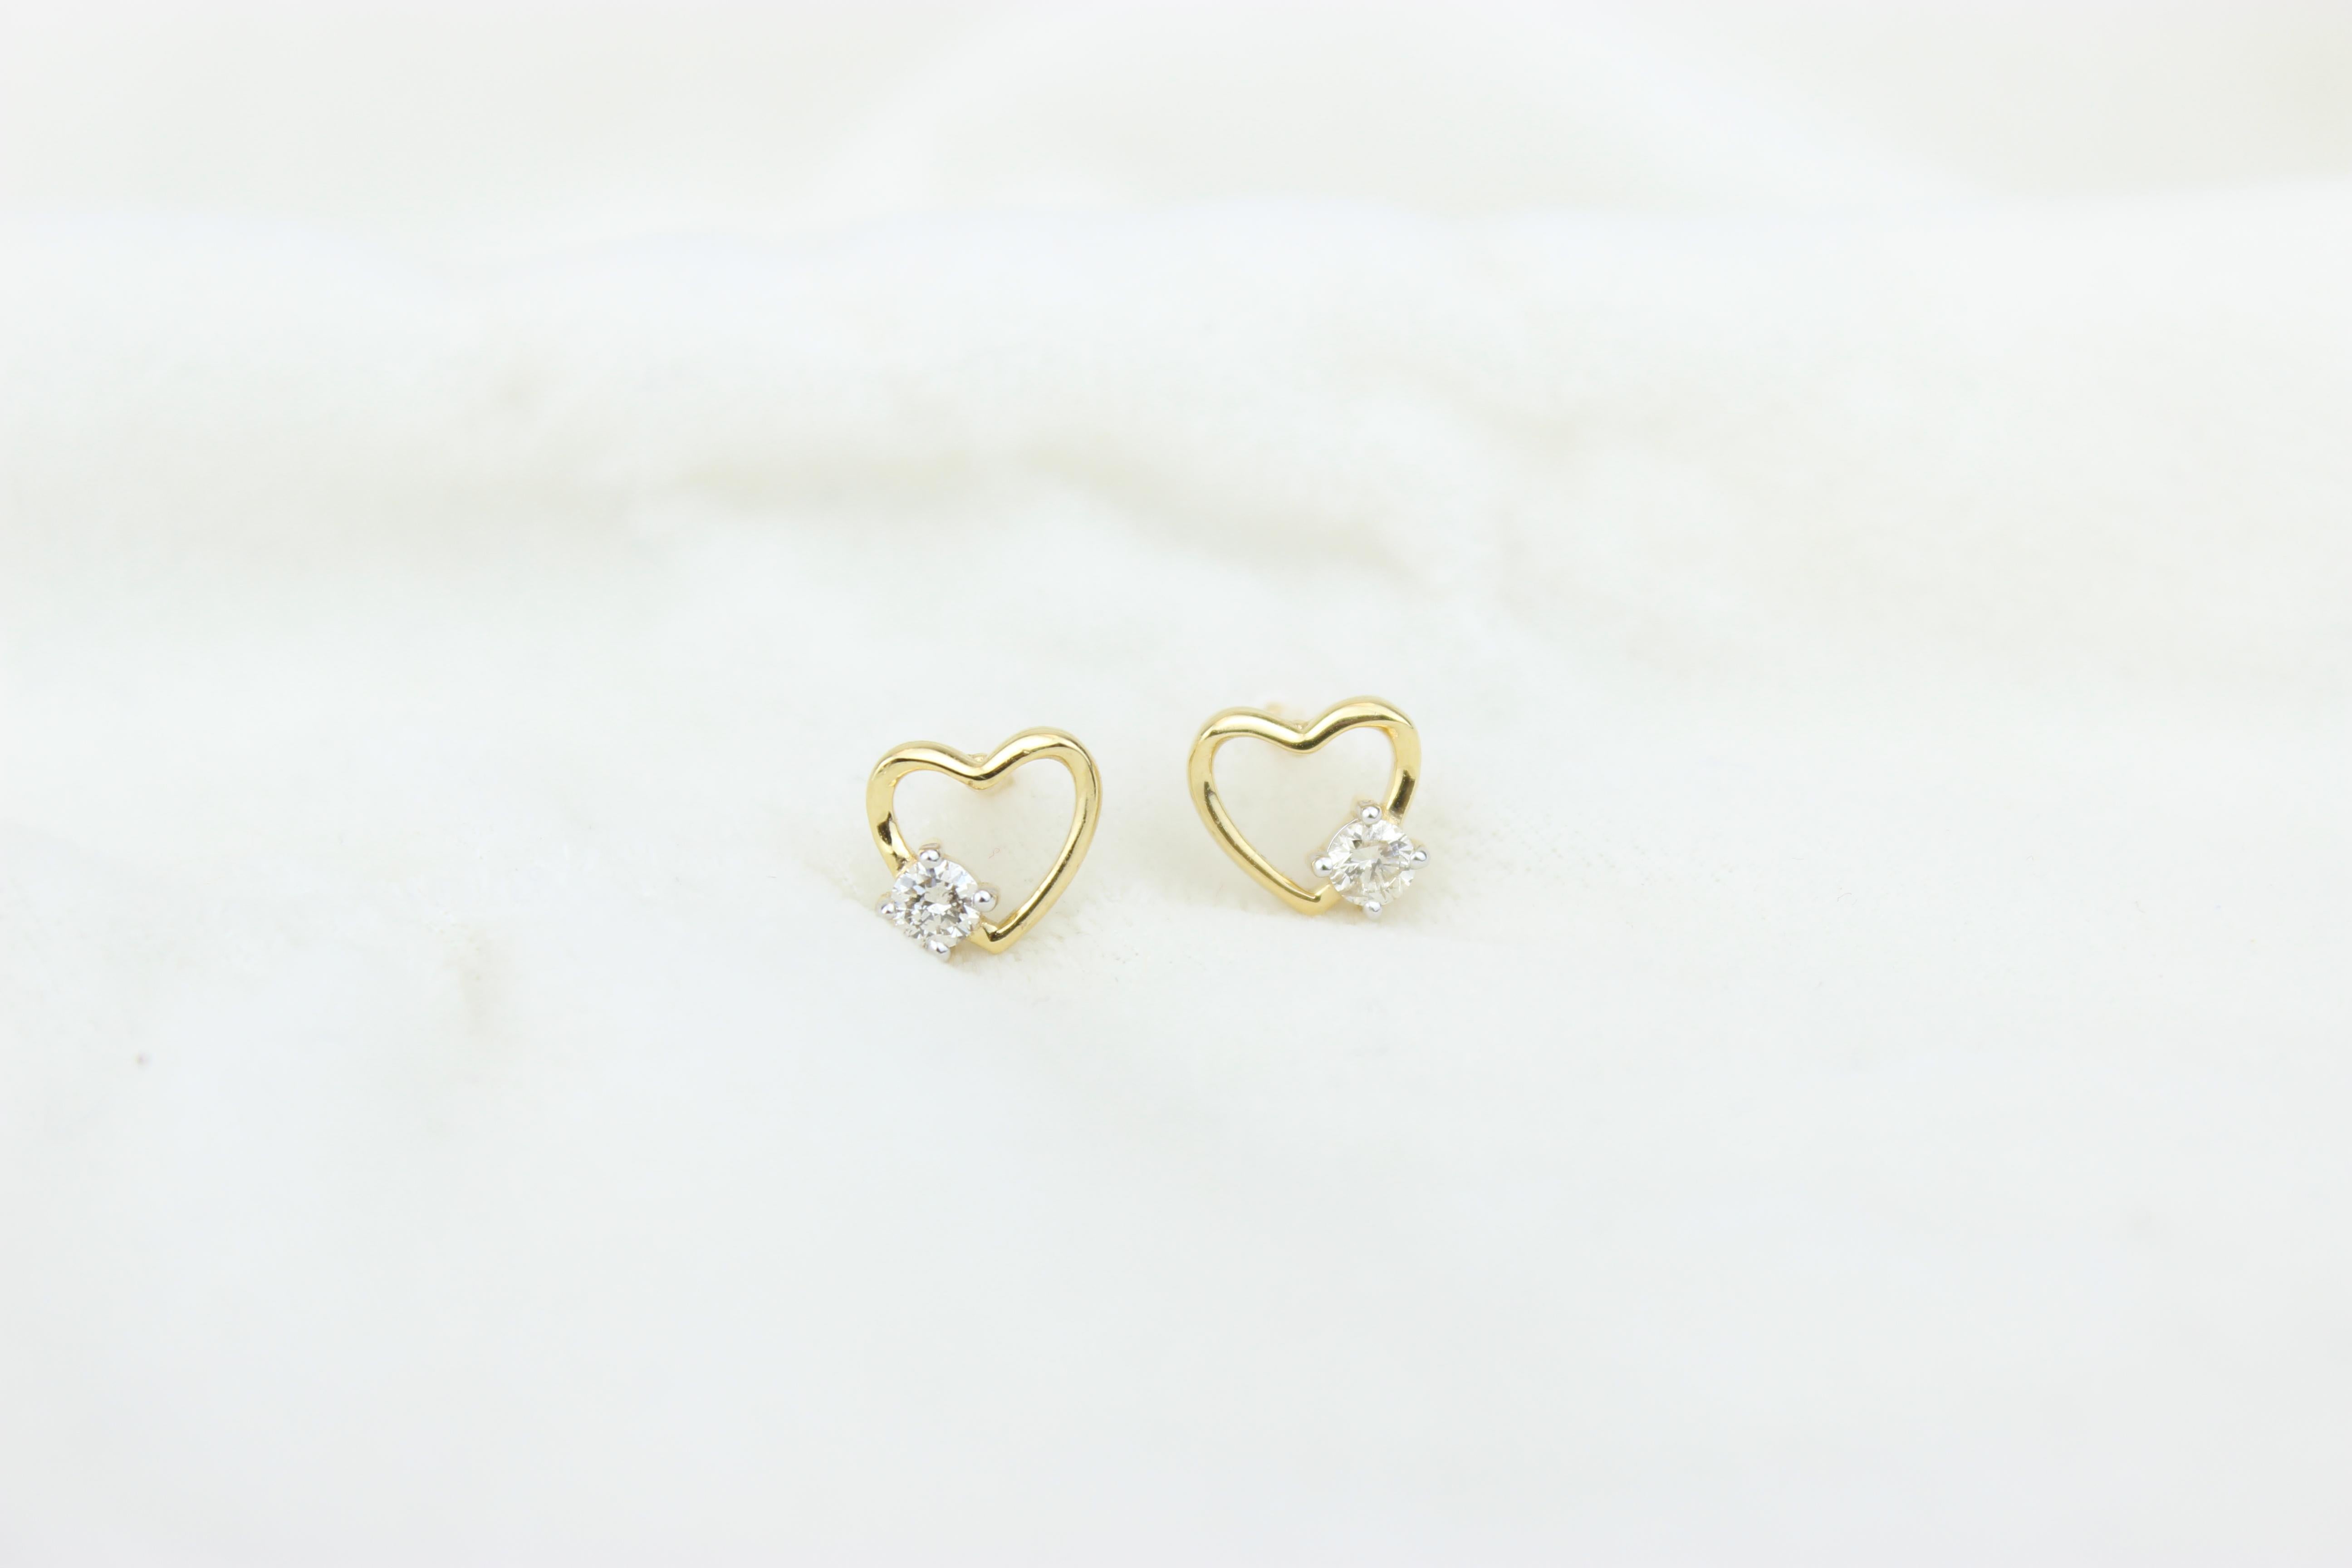 
Heart Diamond Earrings for Girls (Kids/Toddlers) in 18K Solid Gold are adorable and sweet jewelry pieces designed for young children. These earrings showcase a delightful heart-shaped design crafted from high-quality 18K solid gold, ensuring